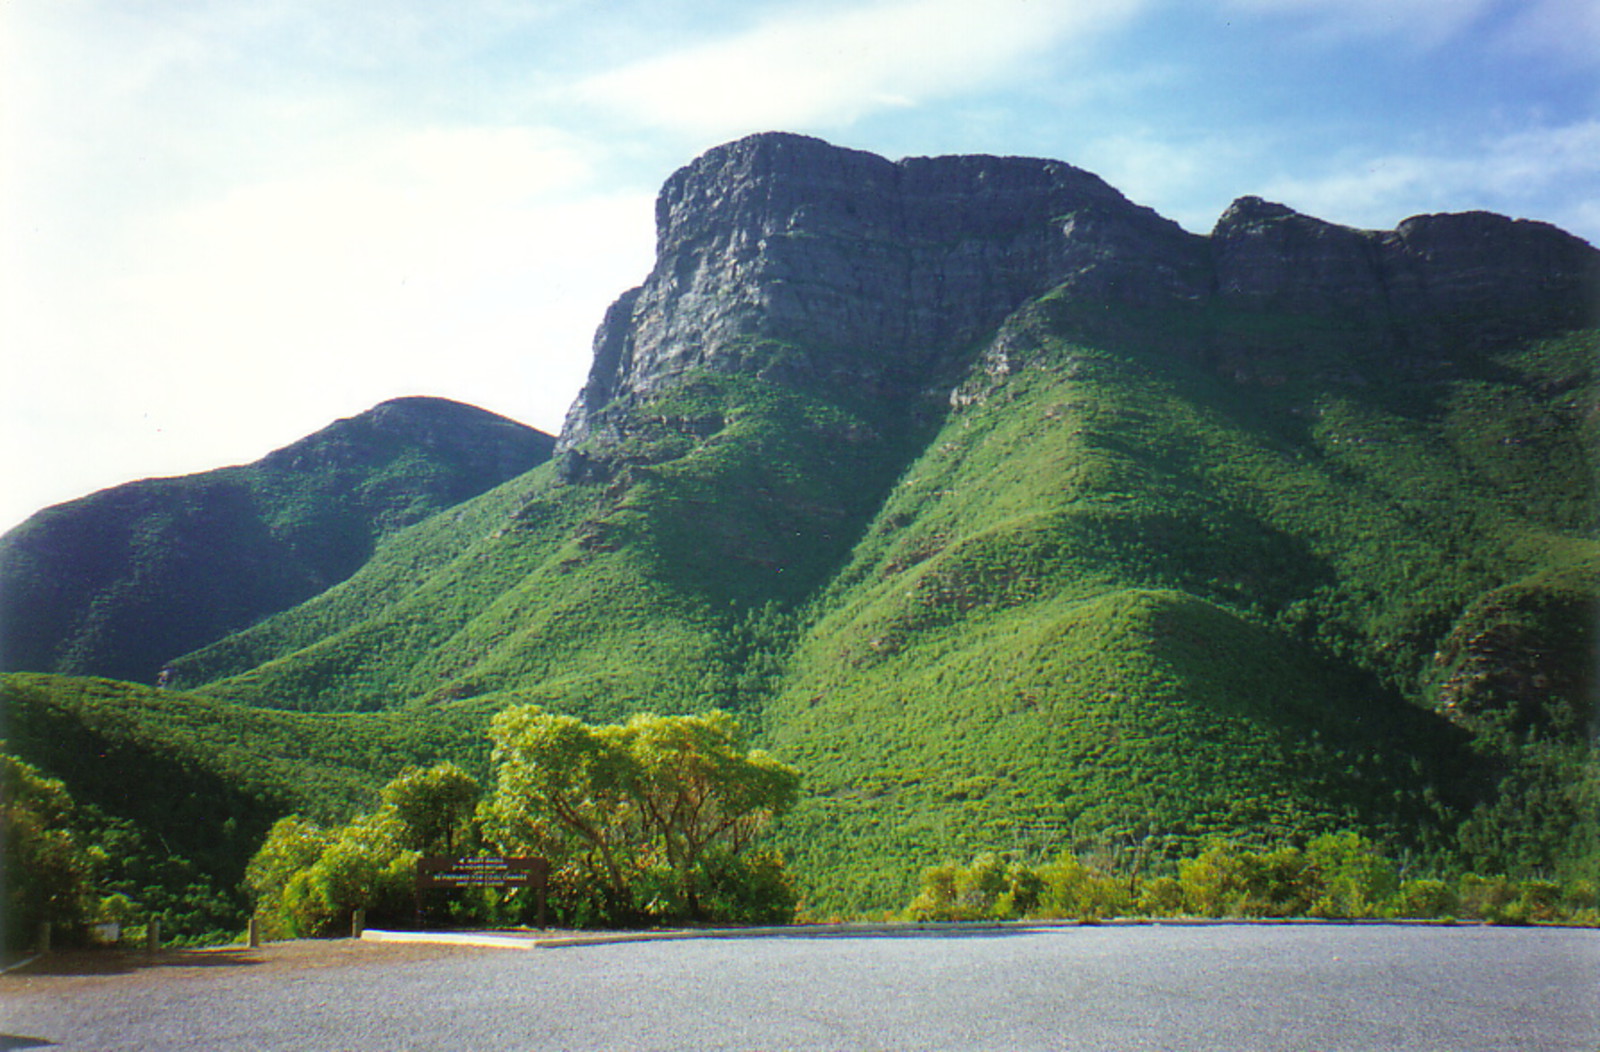 Bluff Knoll in the Stirling Ranges